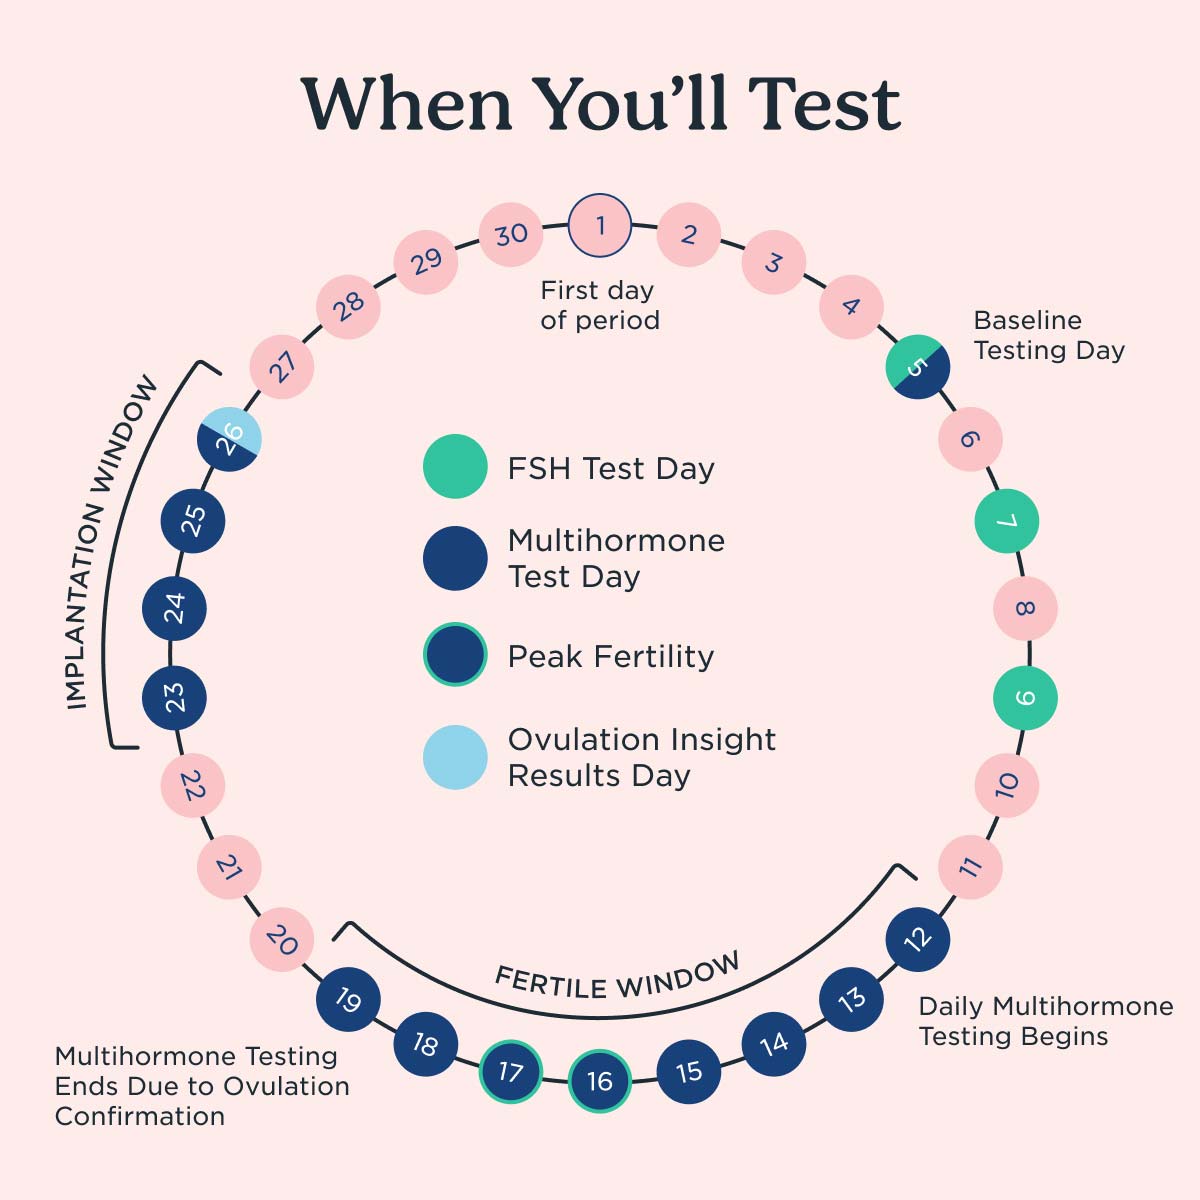 A graphic showing when to test